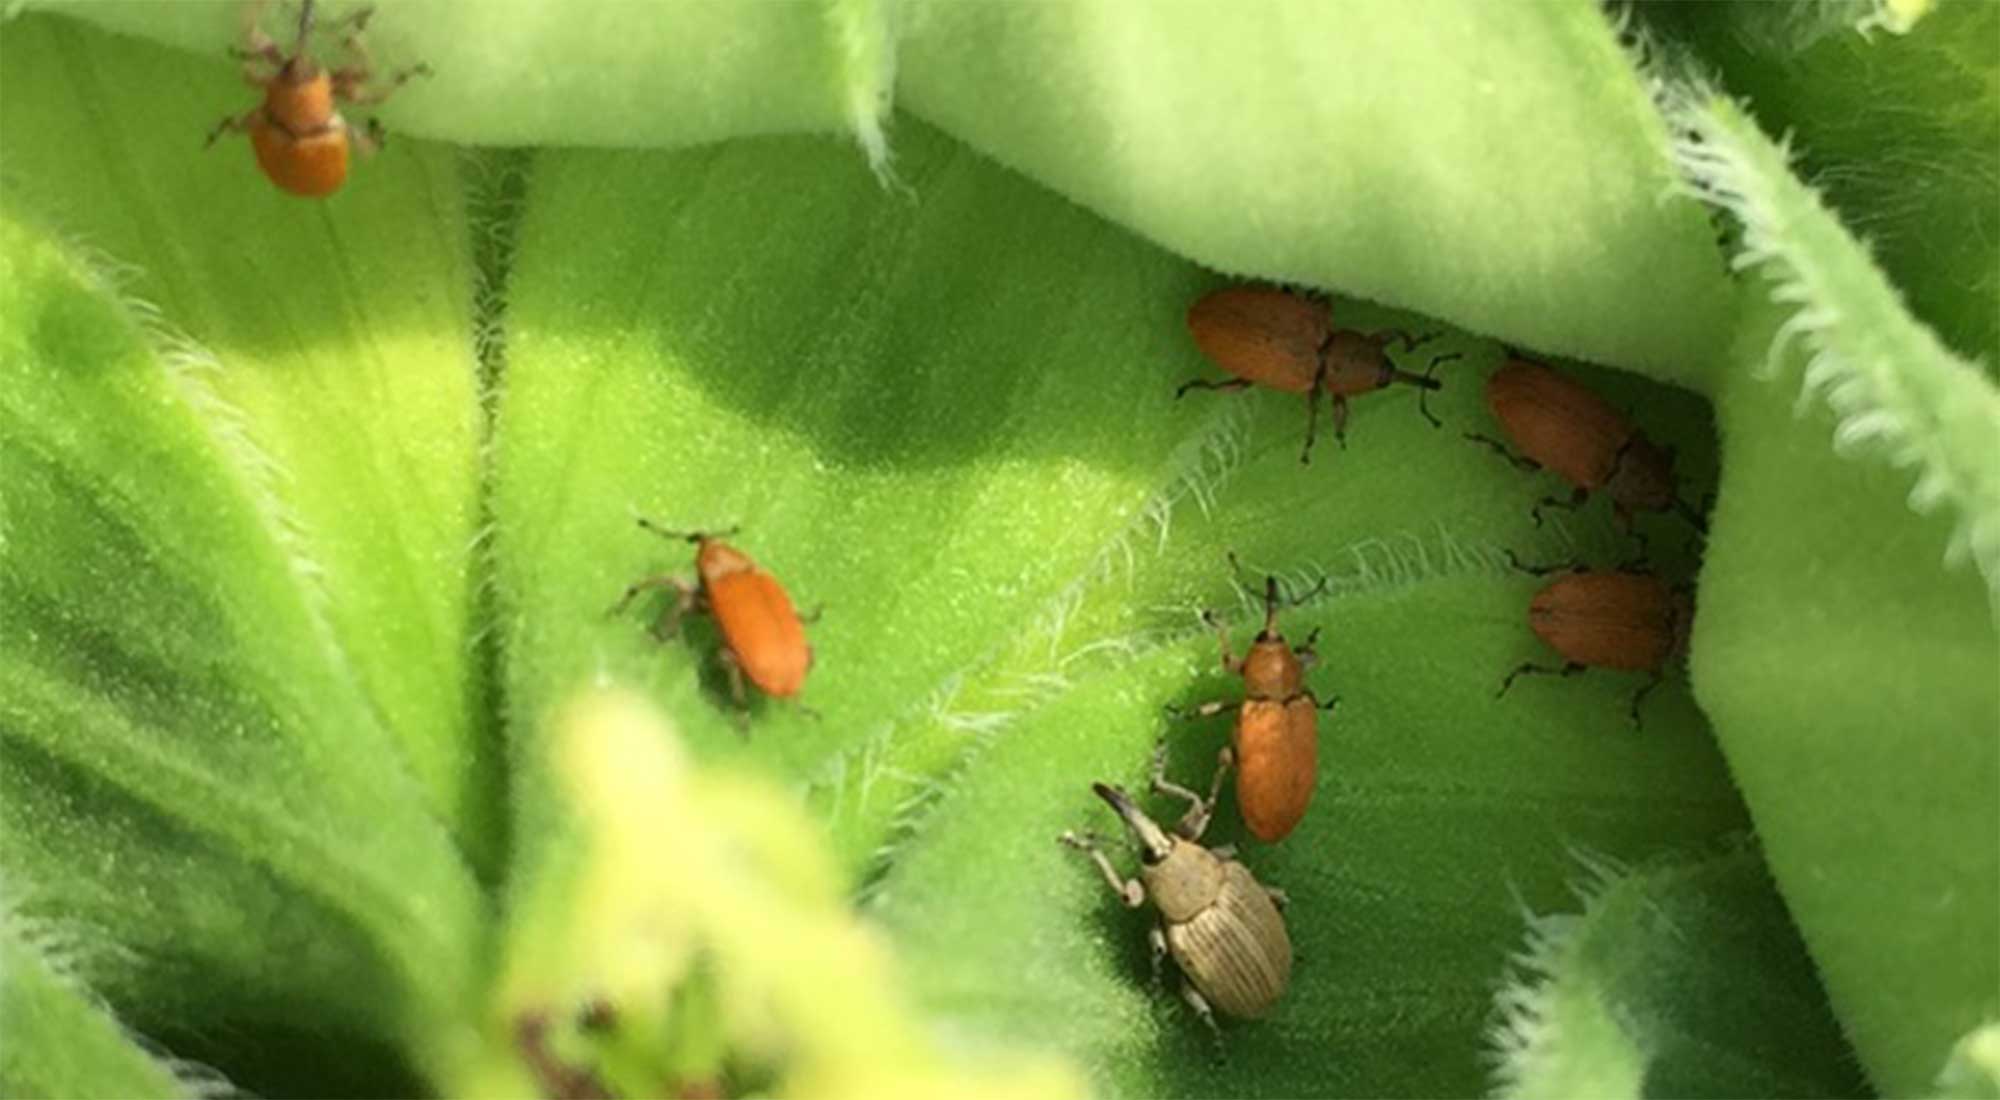 Small, reddish-orange beetles on a green sunflower bud with a larger grey beetle also present.